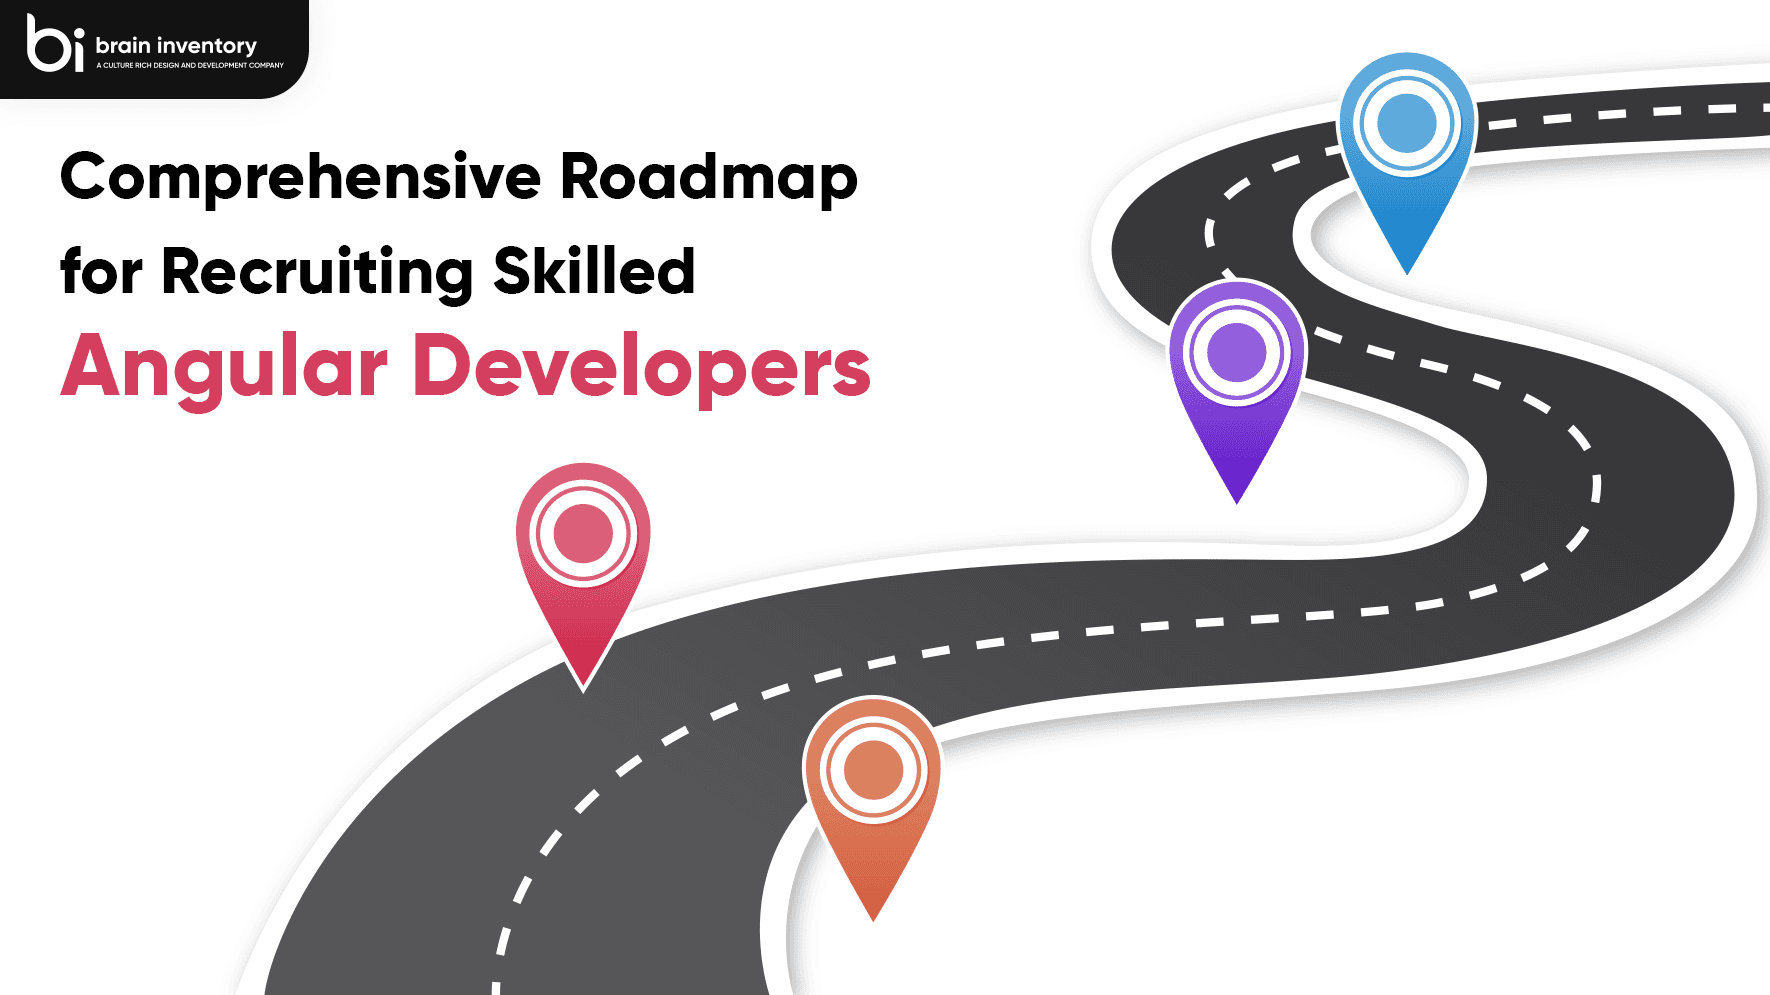 Comprehensive Roadmap for Recruiting Skilled Angular Developers